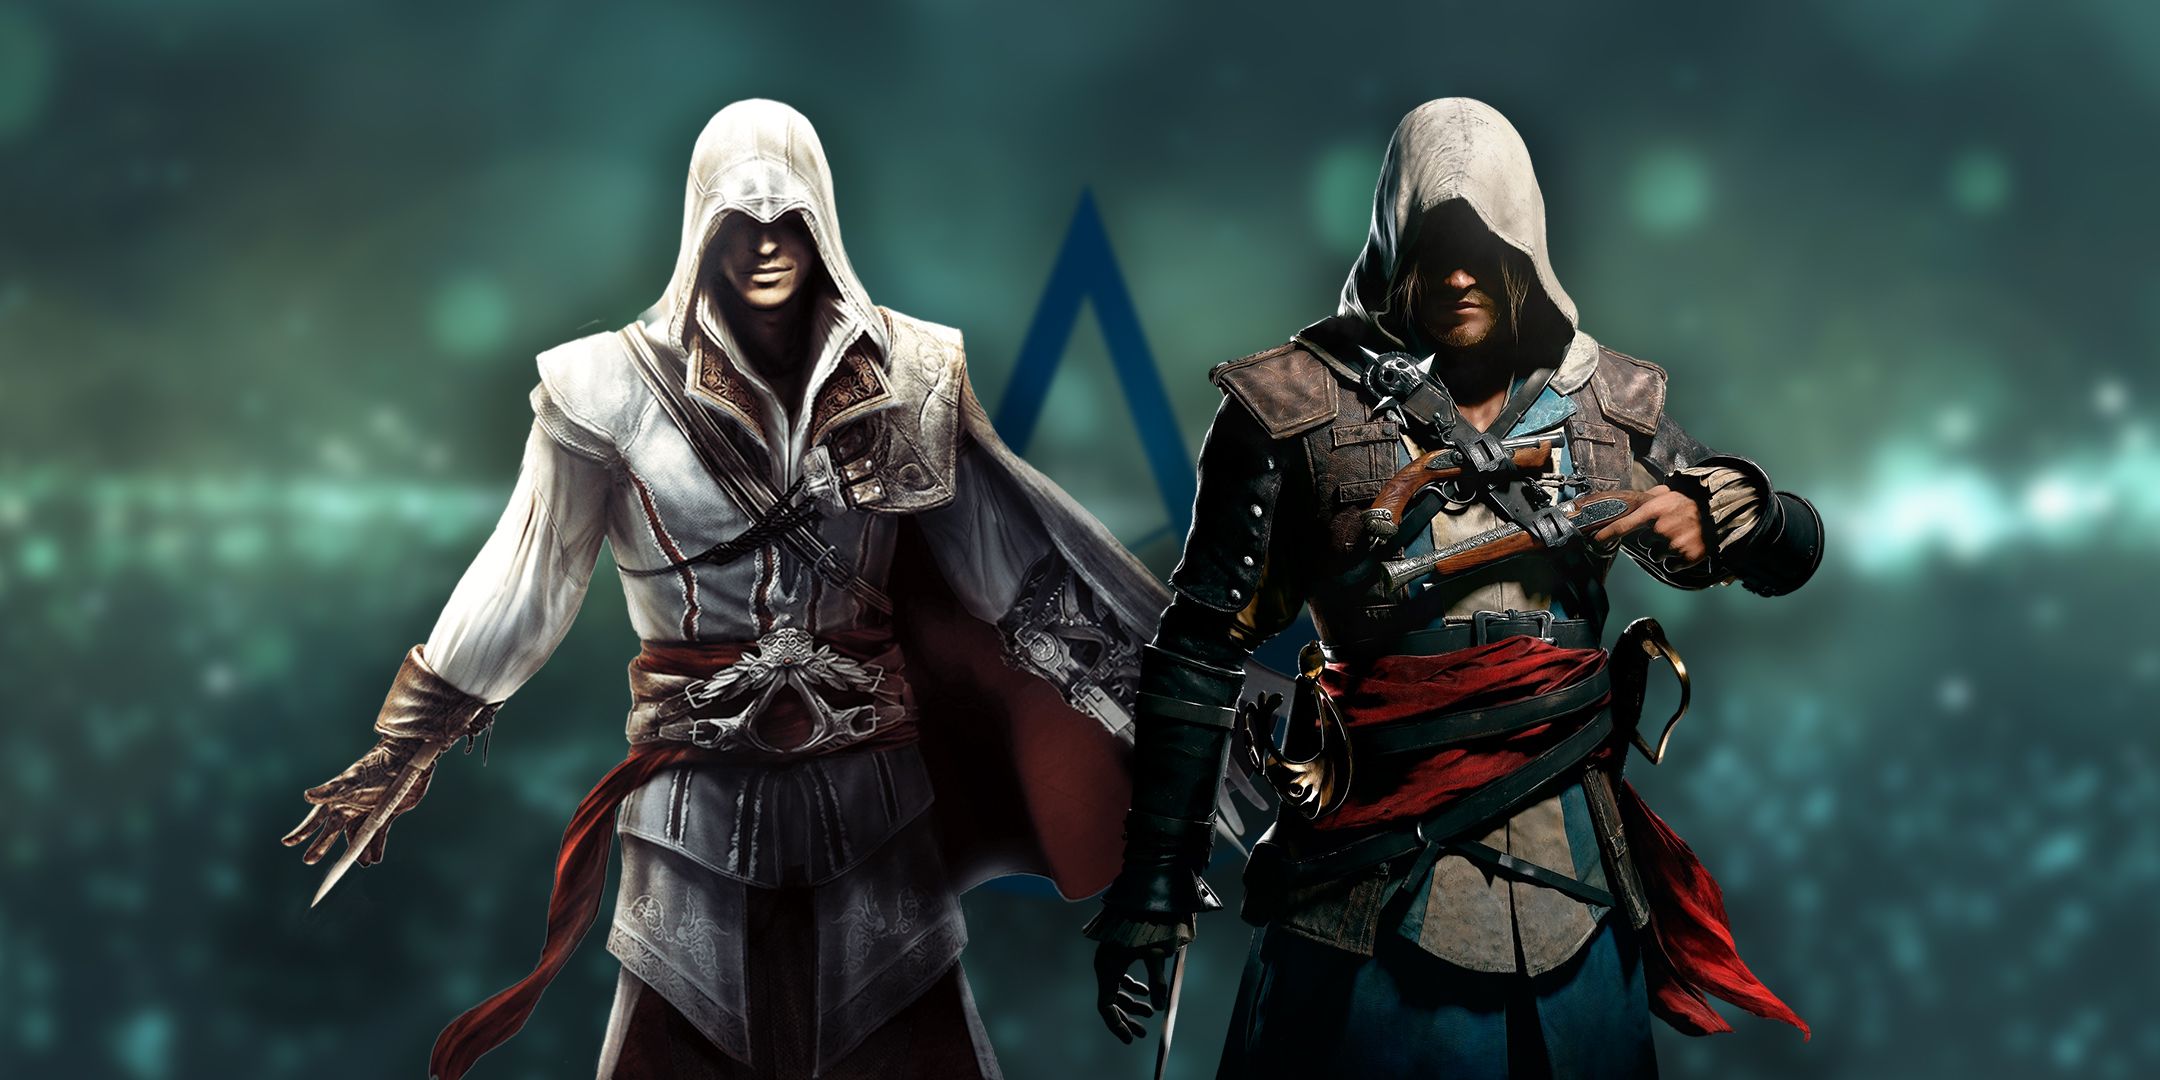 The-10-Highest-Ranking-Assassin's-Creed-Games-on-Steam-Thumbnail-Website